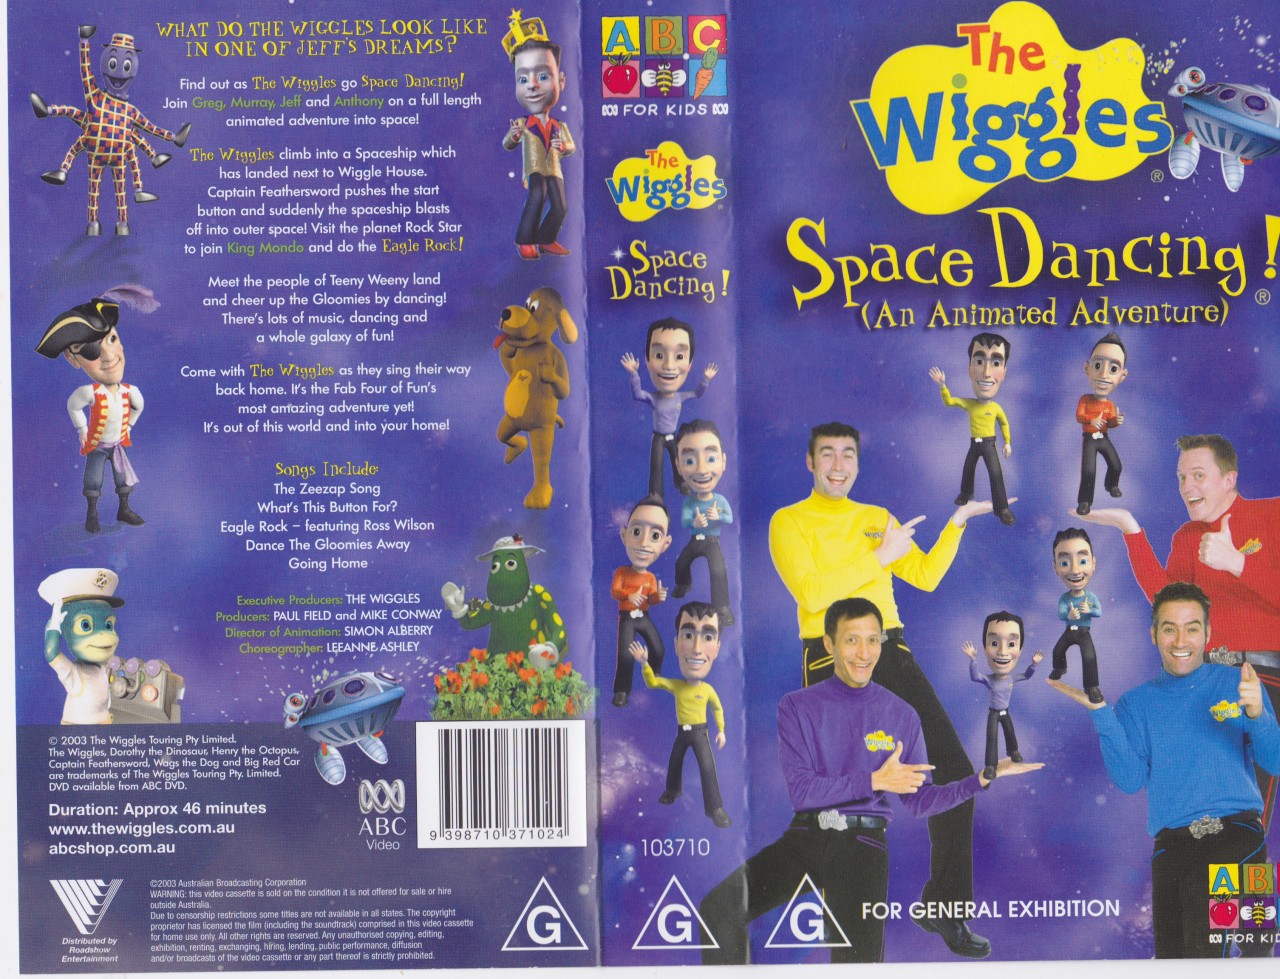 The wiggles space dancing VHS video pal a rare find ebay.